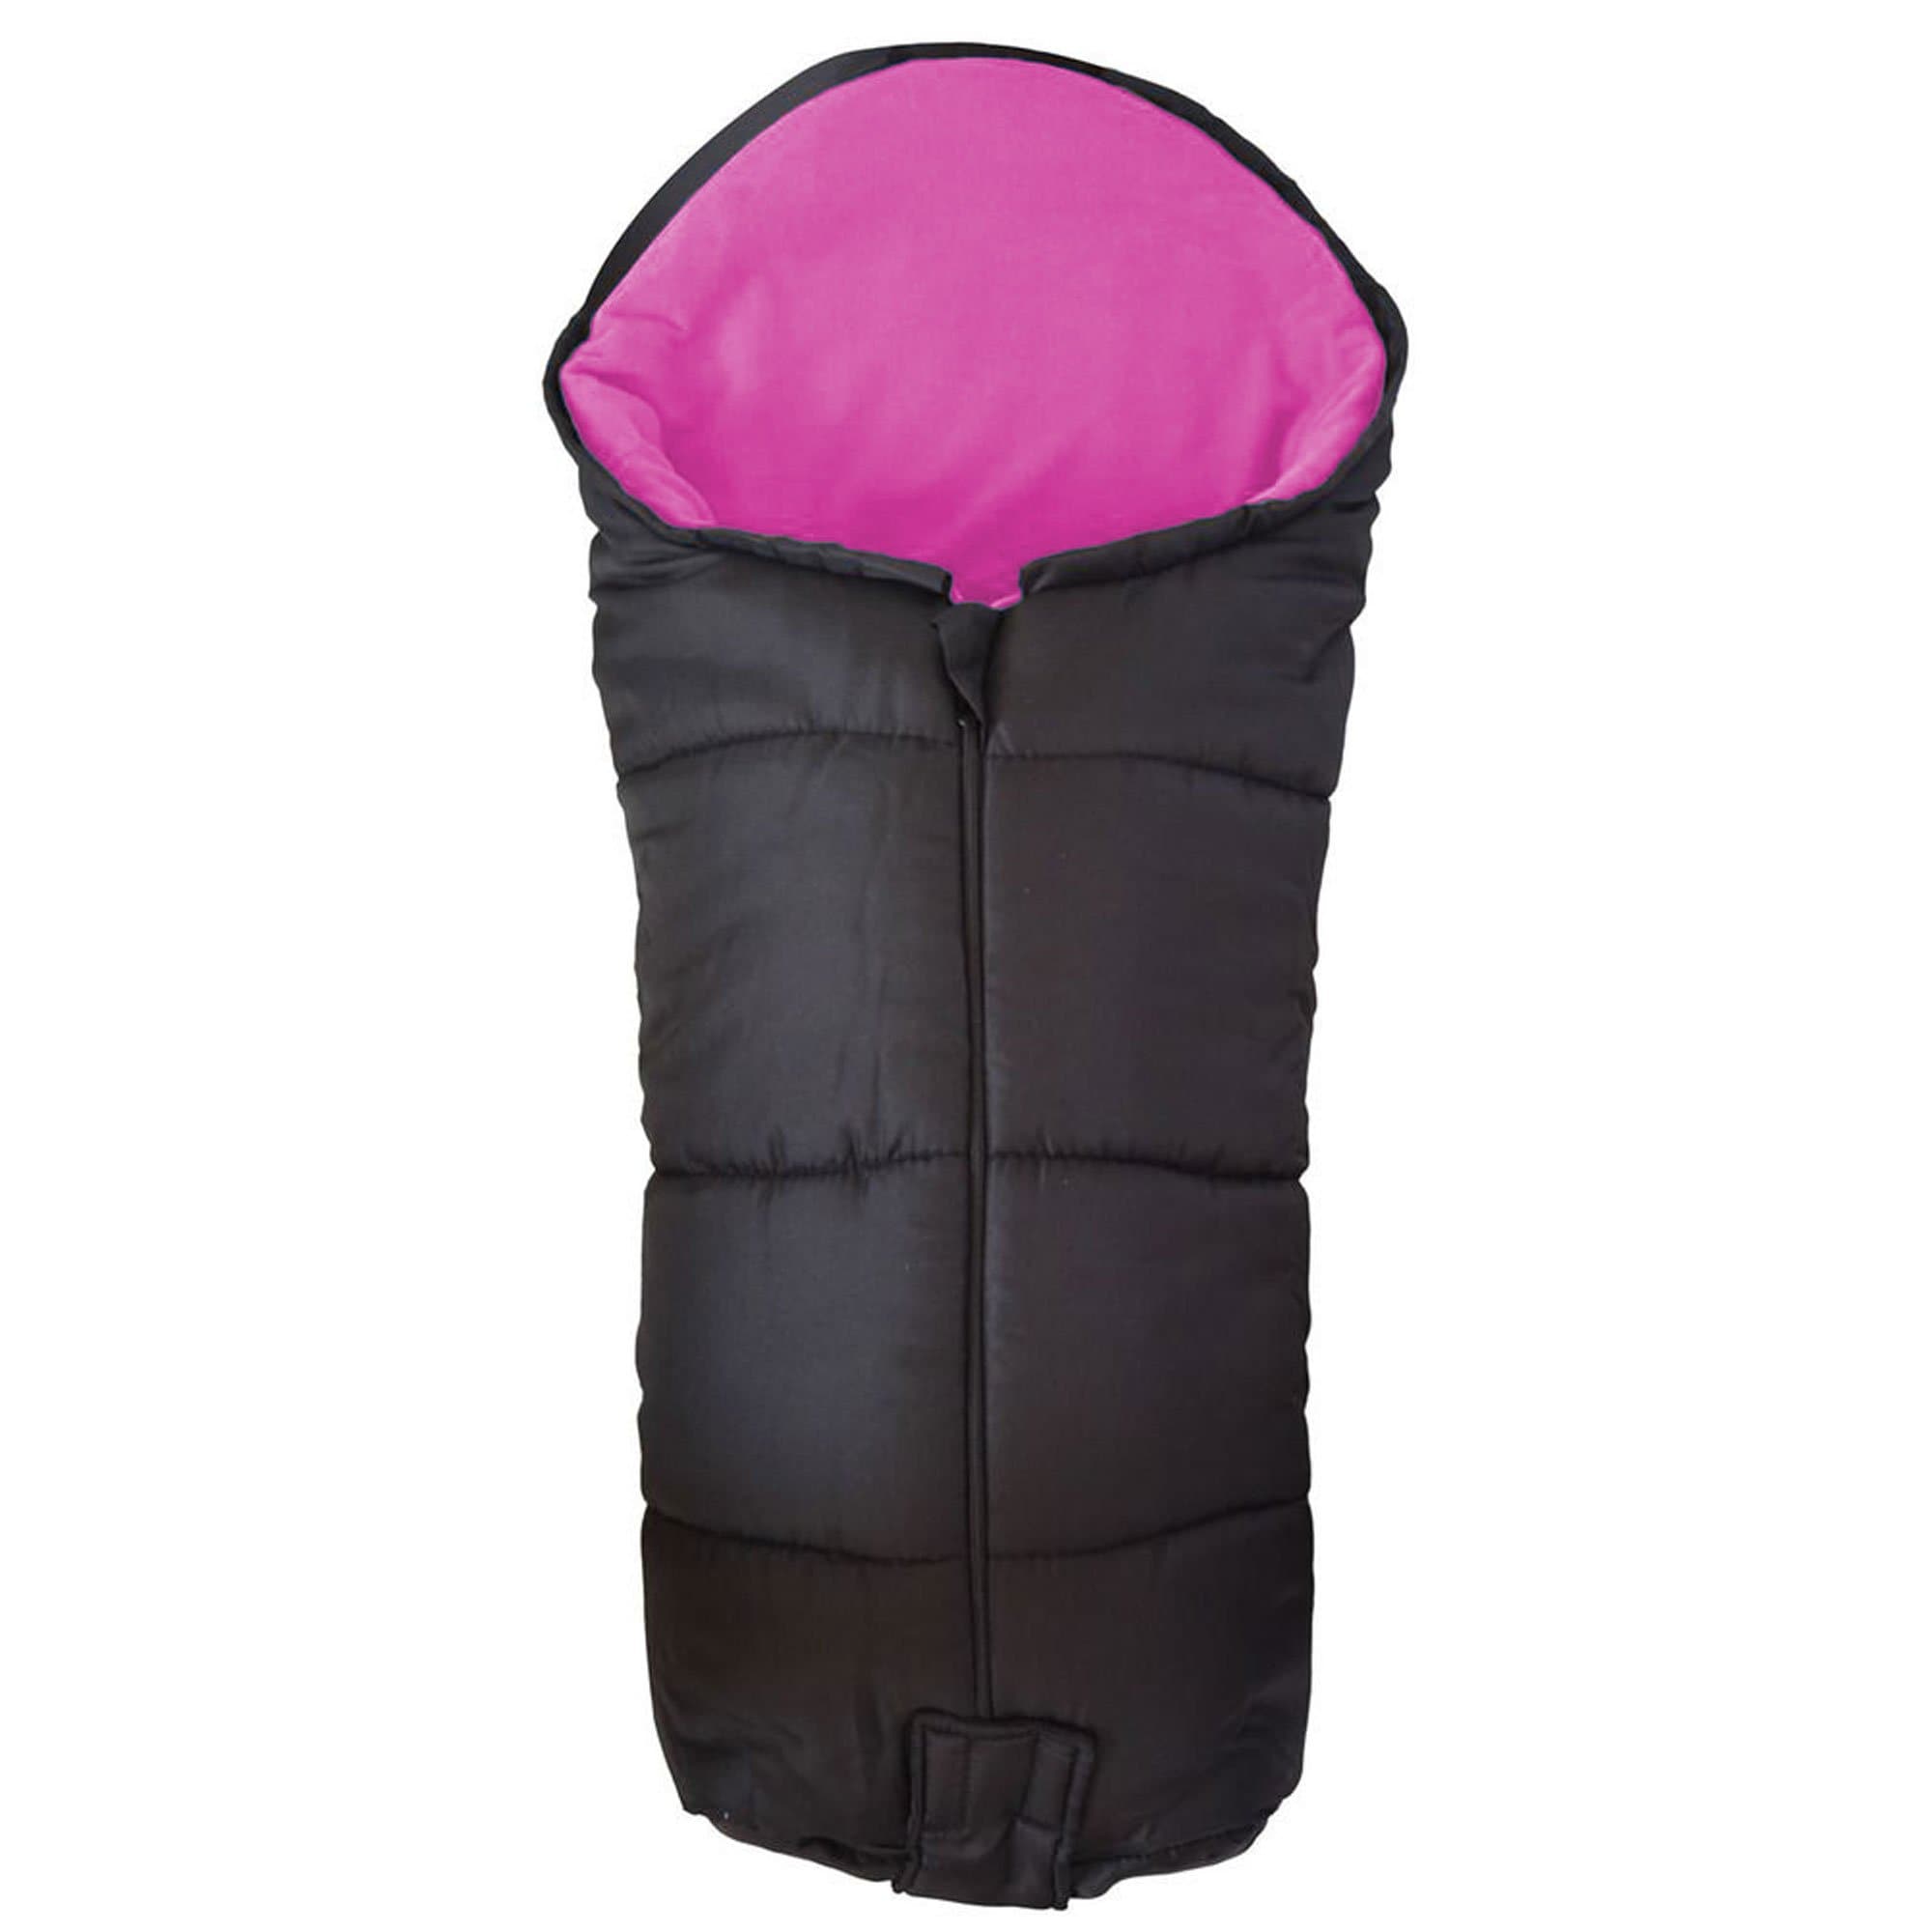 Deluxe Footmuff / Cosy Toes Compatible with Kinderkraft - Pink / Fits All Models | For Your Little One